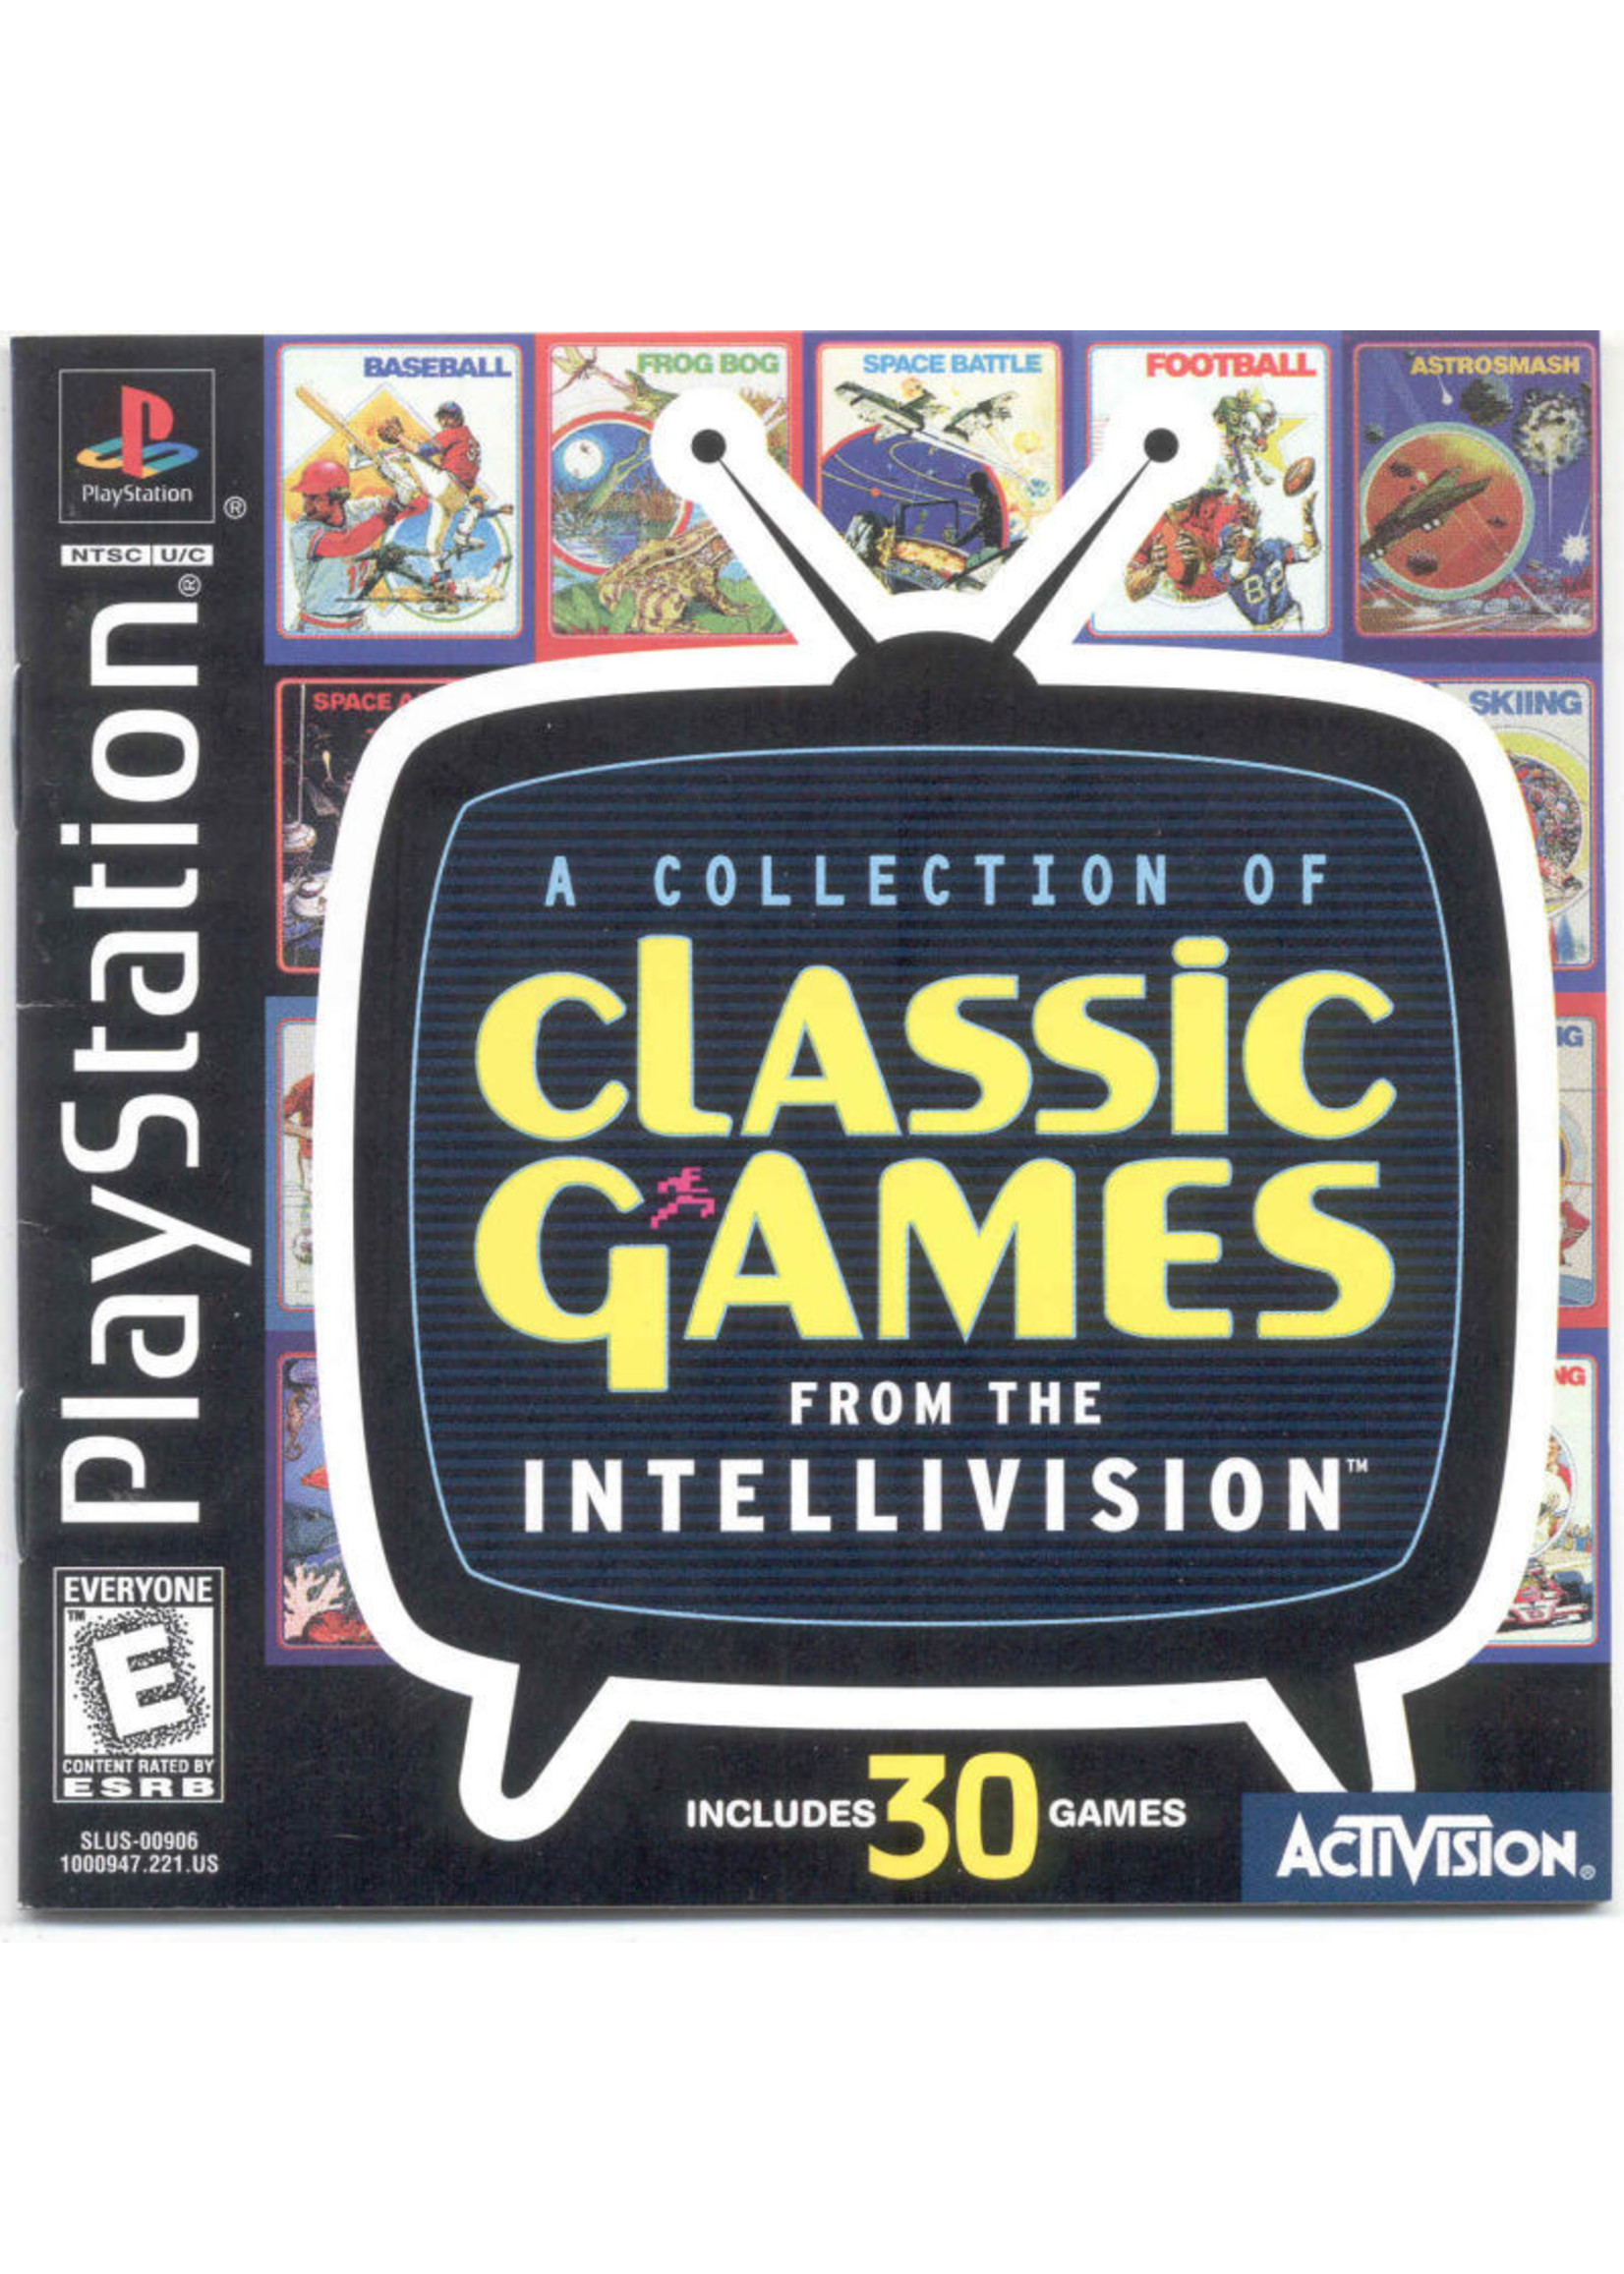 Sony Playstation 1 (PS1) Intellivision Classic Games